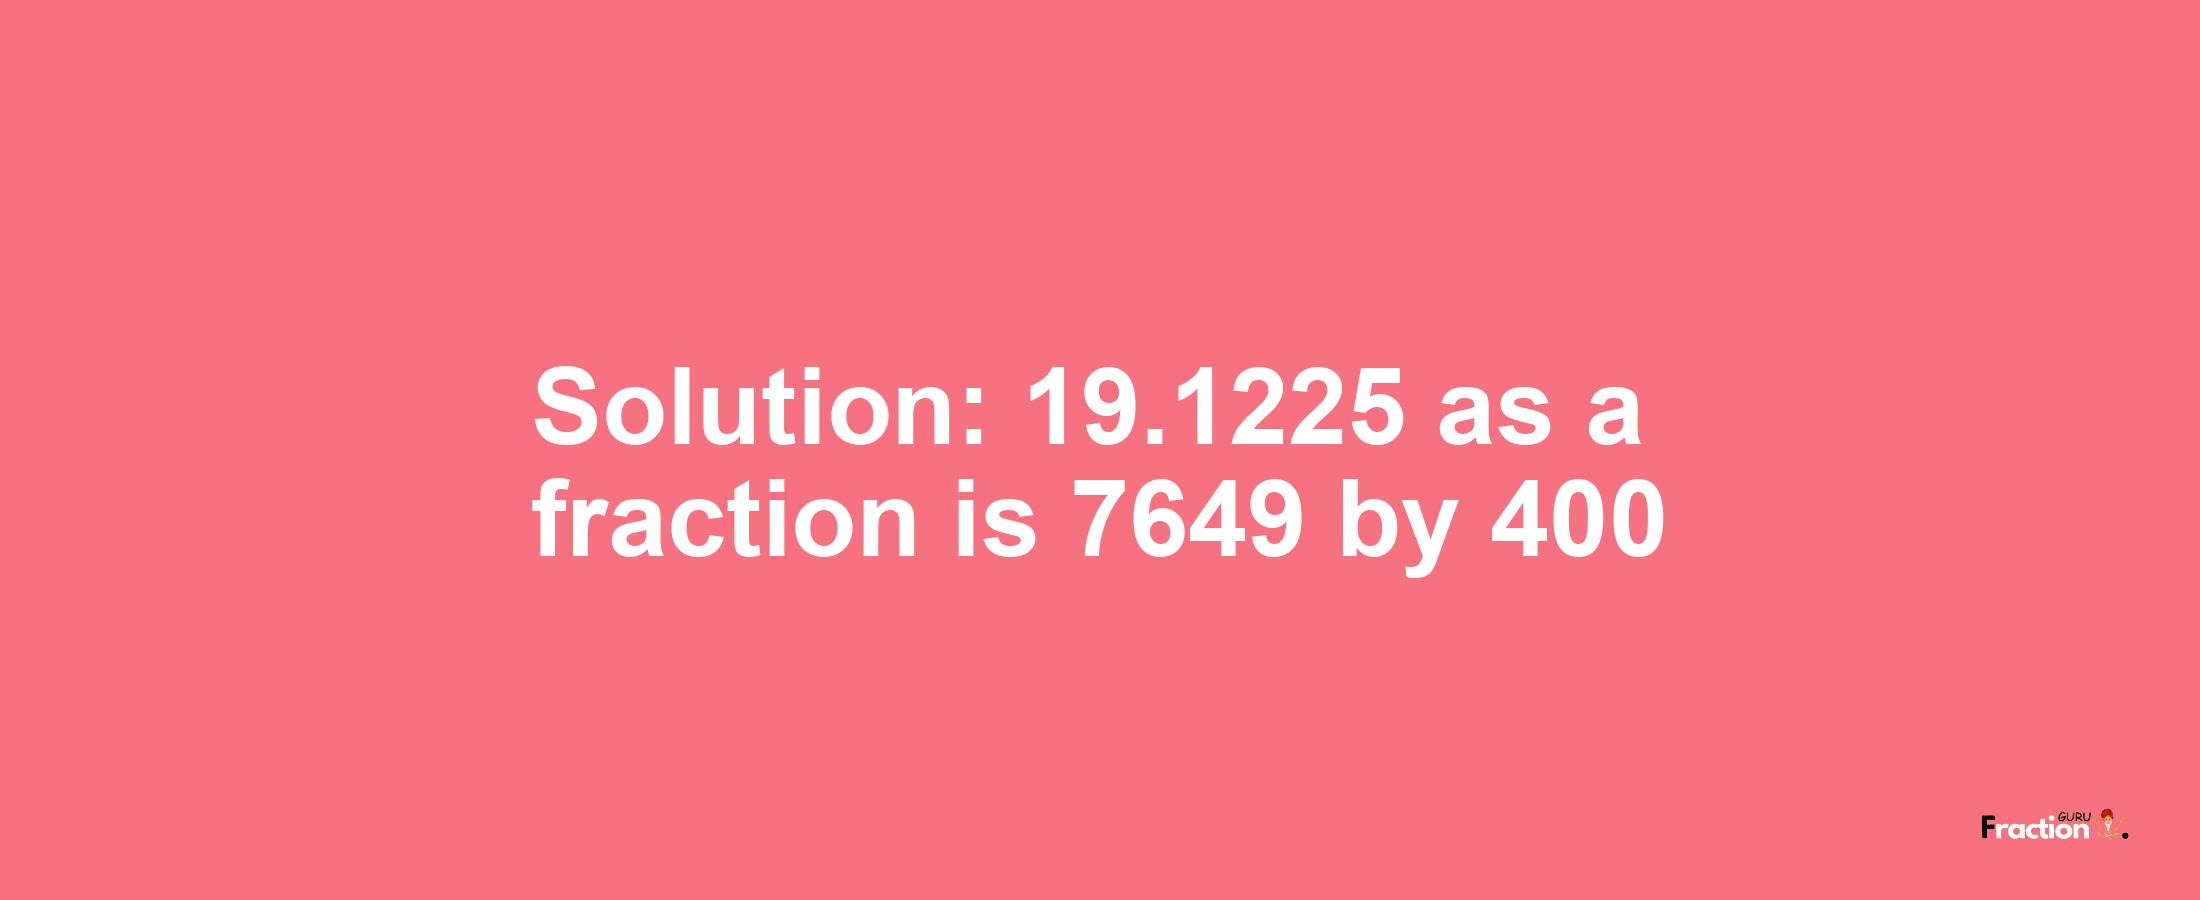 Solution:19.1225 as a fraction is 7649/400